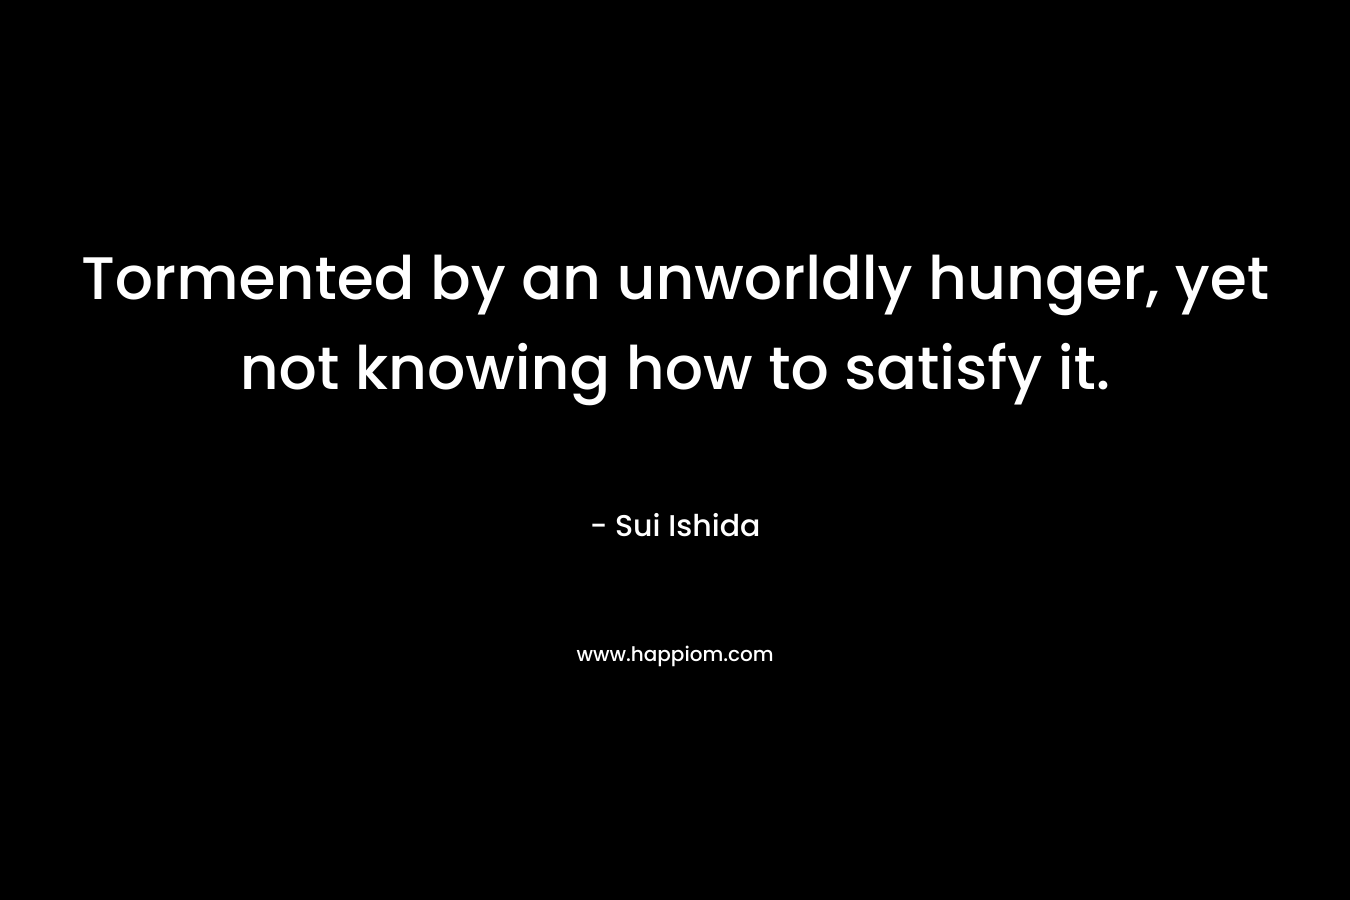 Tormented by an unworldly hunger, yet not knowing how to satisfy it.